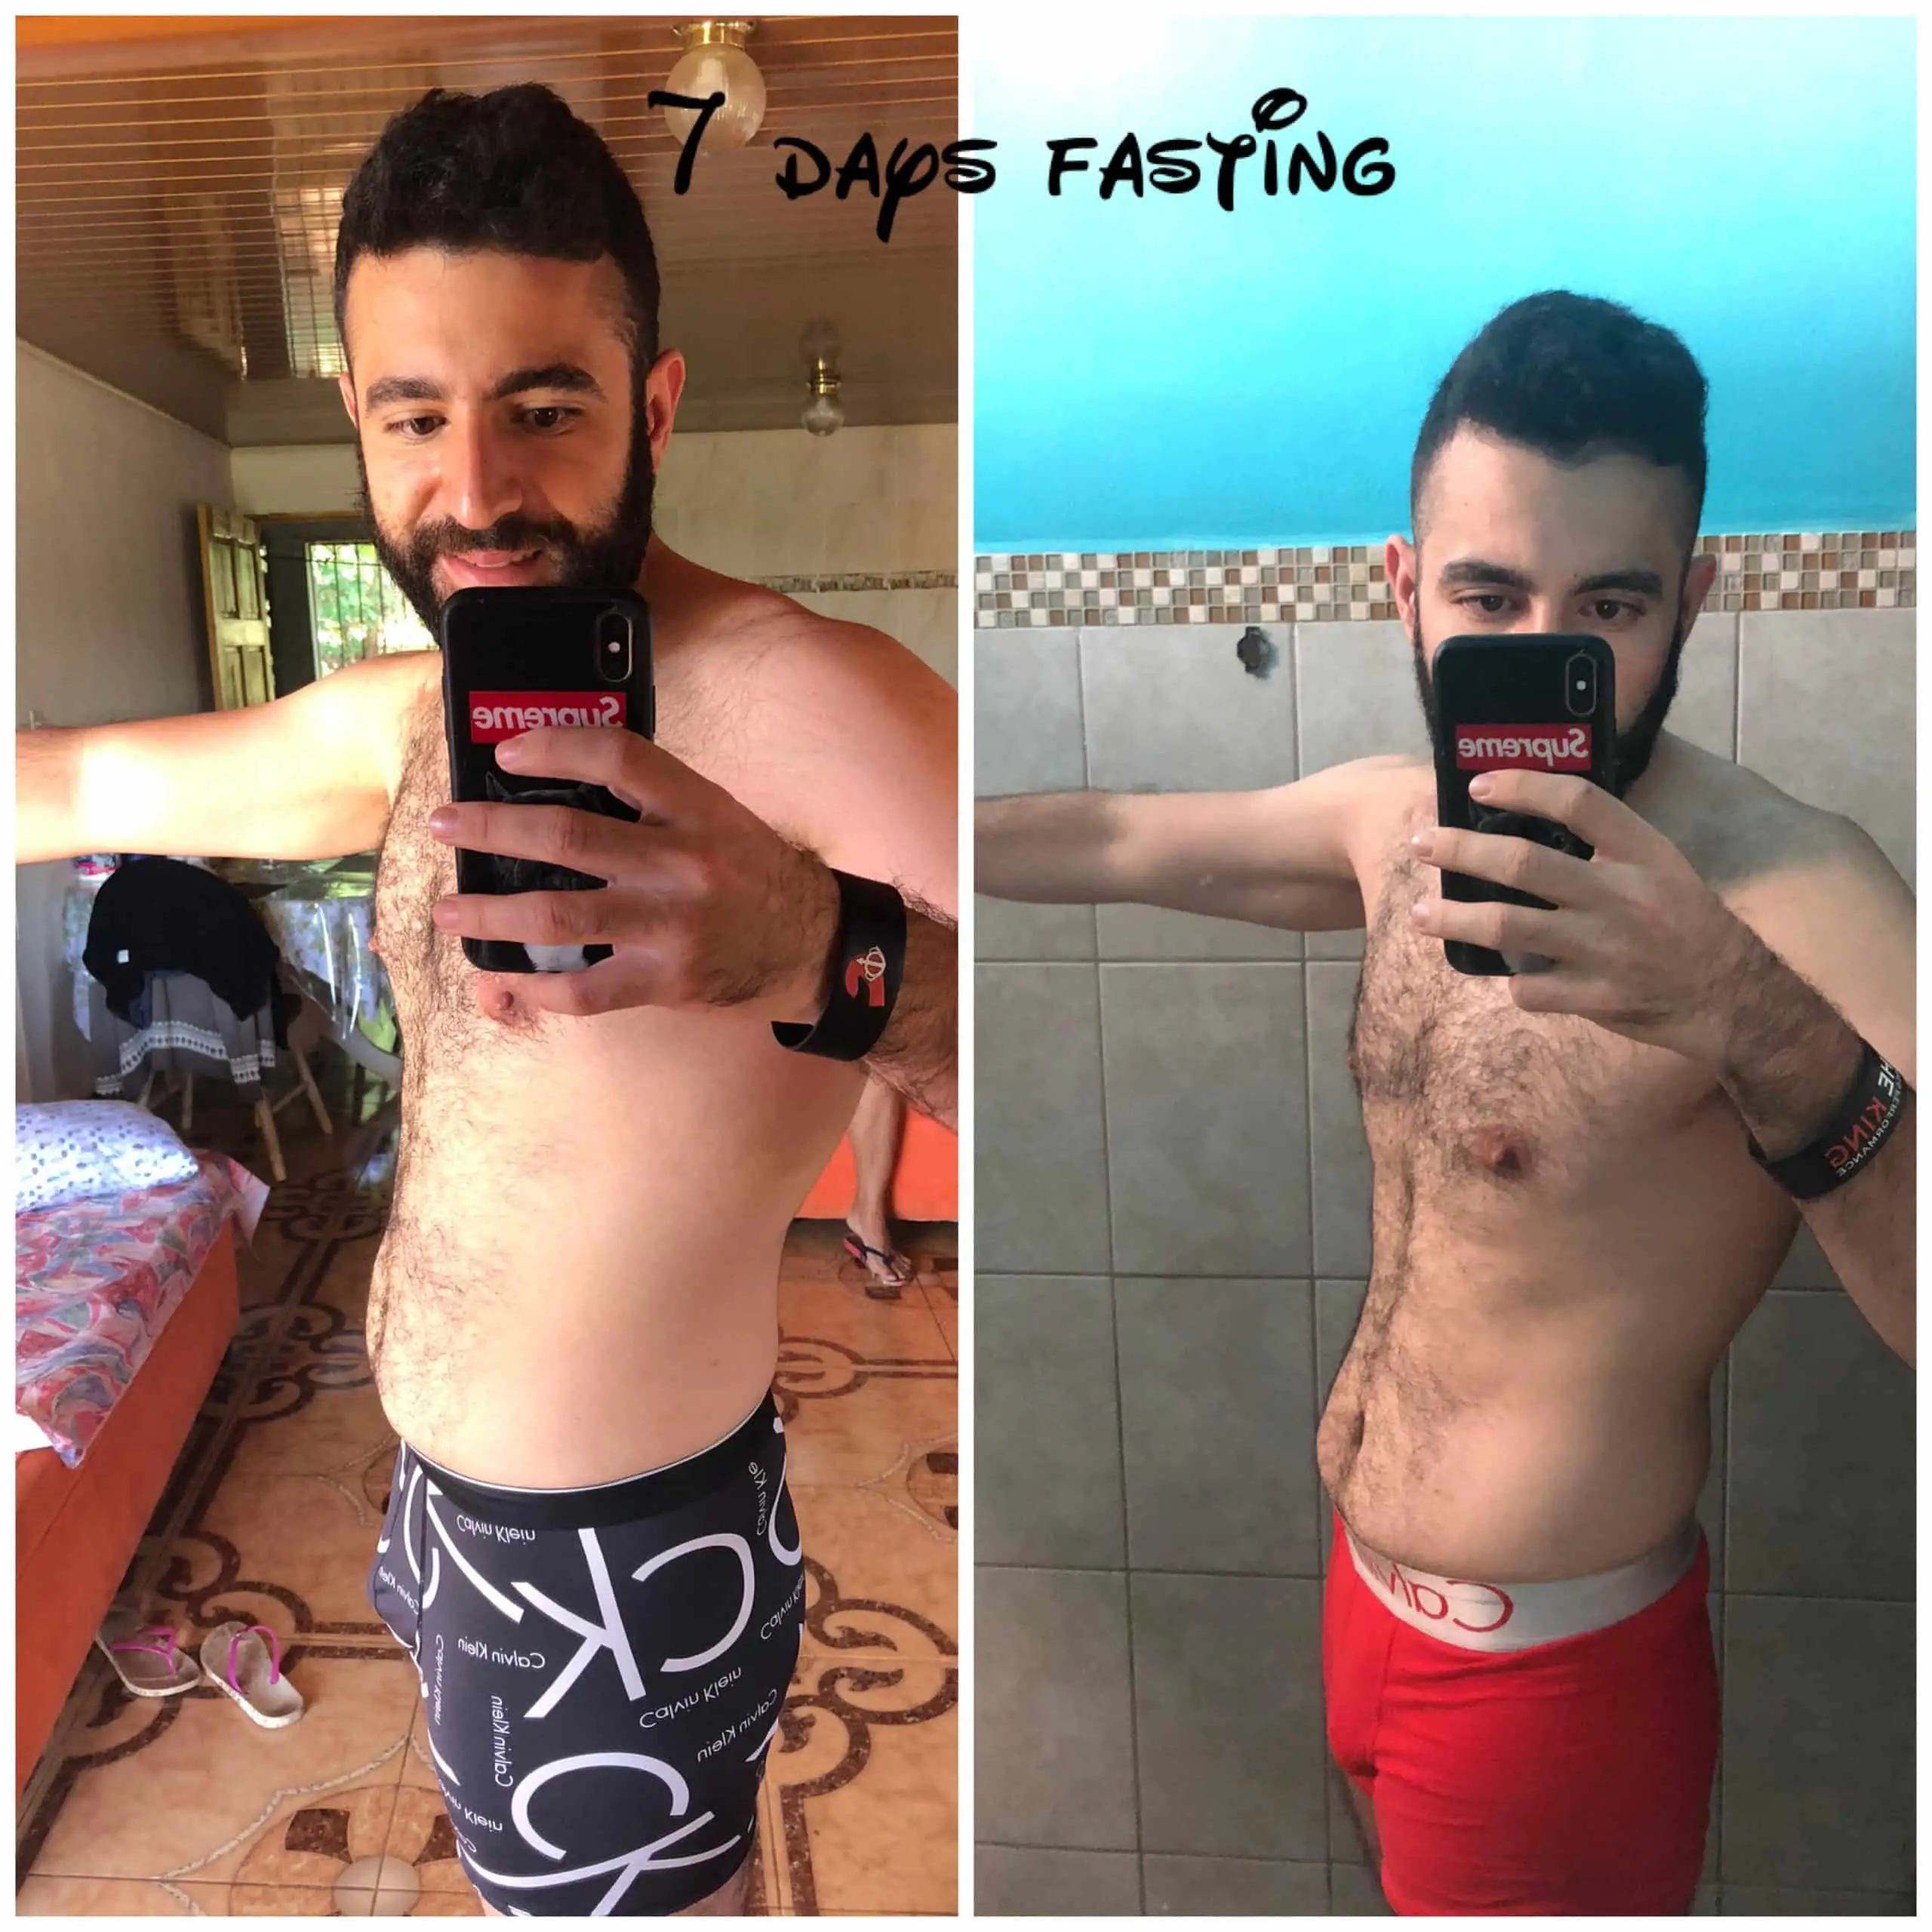 A long hard journey! 7 days water fasting. I really recommend it! : fasting